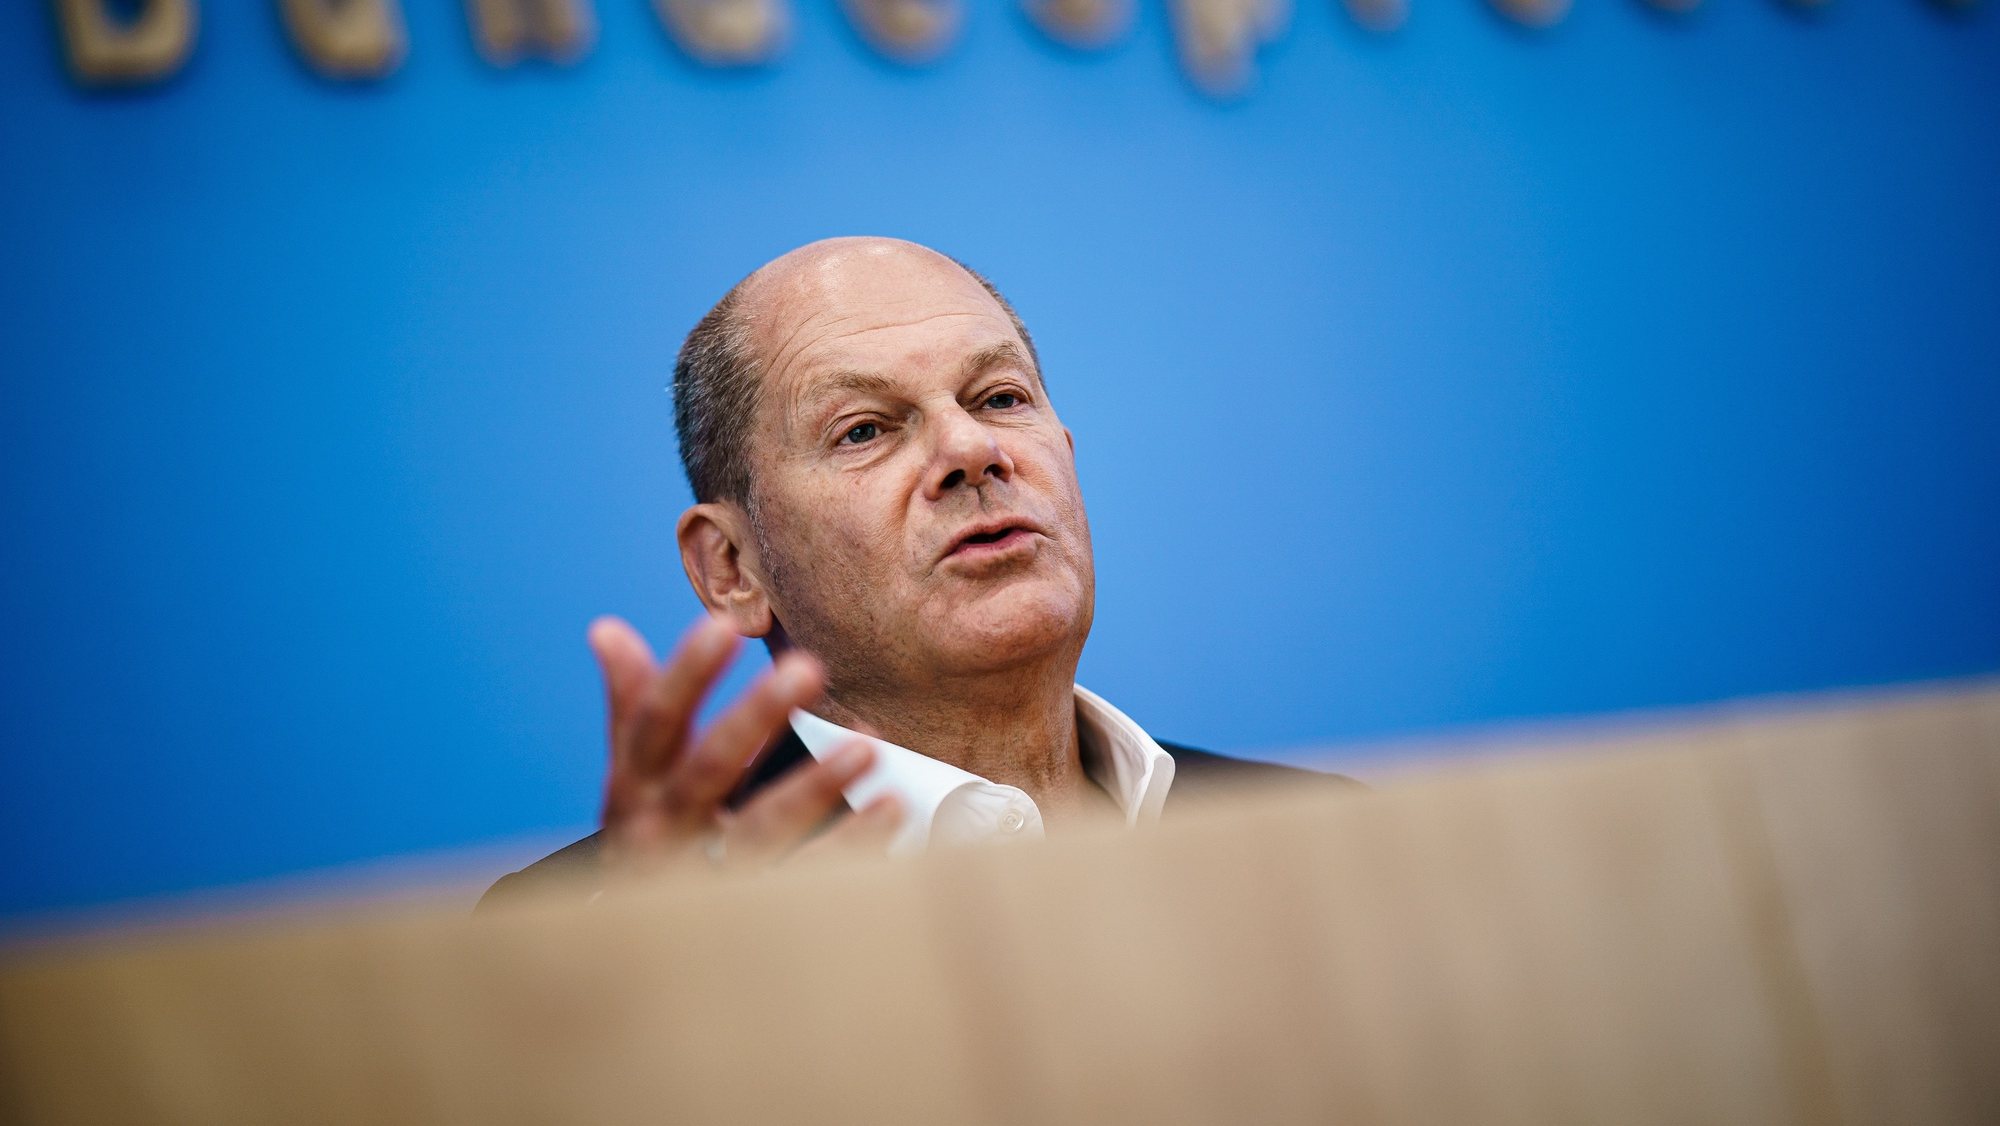 epa10115452 German Chancellor Olaf Scholz gestures during a press conference at the Federal Press Conference (Bundespressekonferenz) in Berlin, Germany, 11 August 2022. The traditional media briefing, about current topics in domestic and foreign policy, usually takes place during summer time.  EPA/CLEMENS BILAN